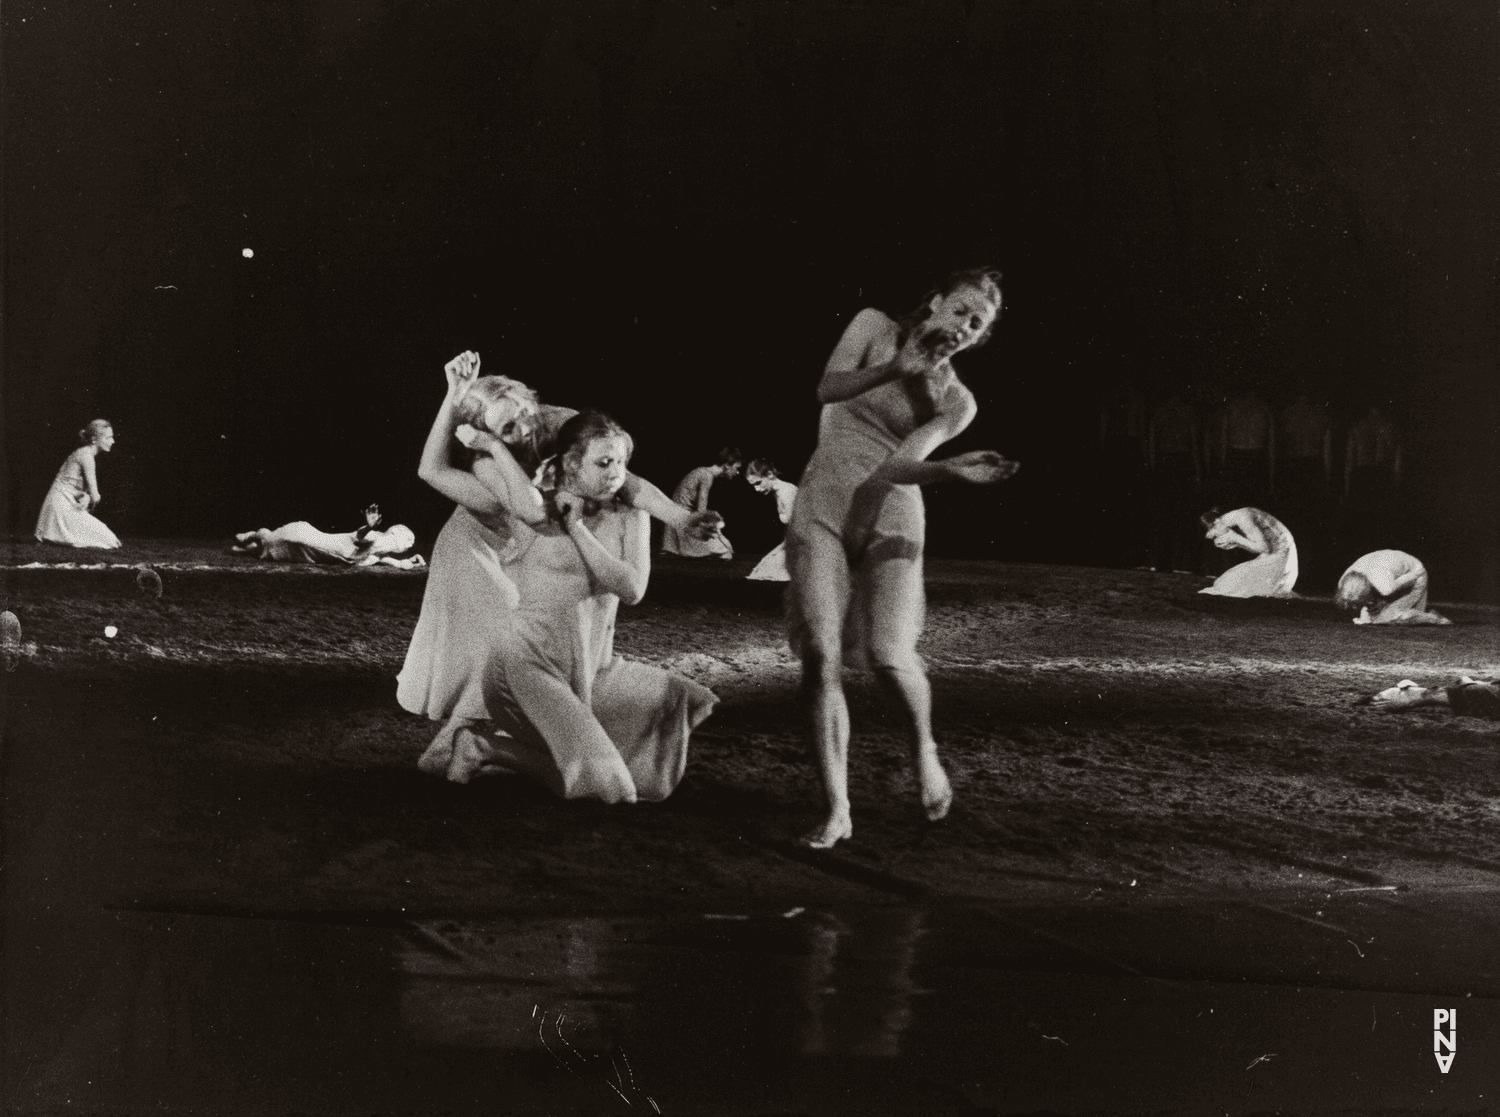 Josephine Ann Endicott and Tjitske Broersma in “The Rite of Spring” by Pina Bausch